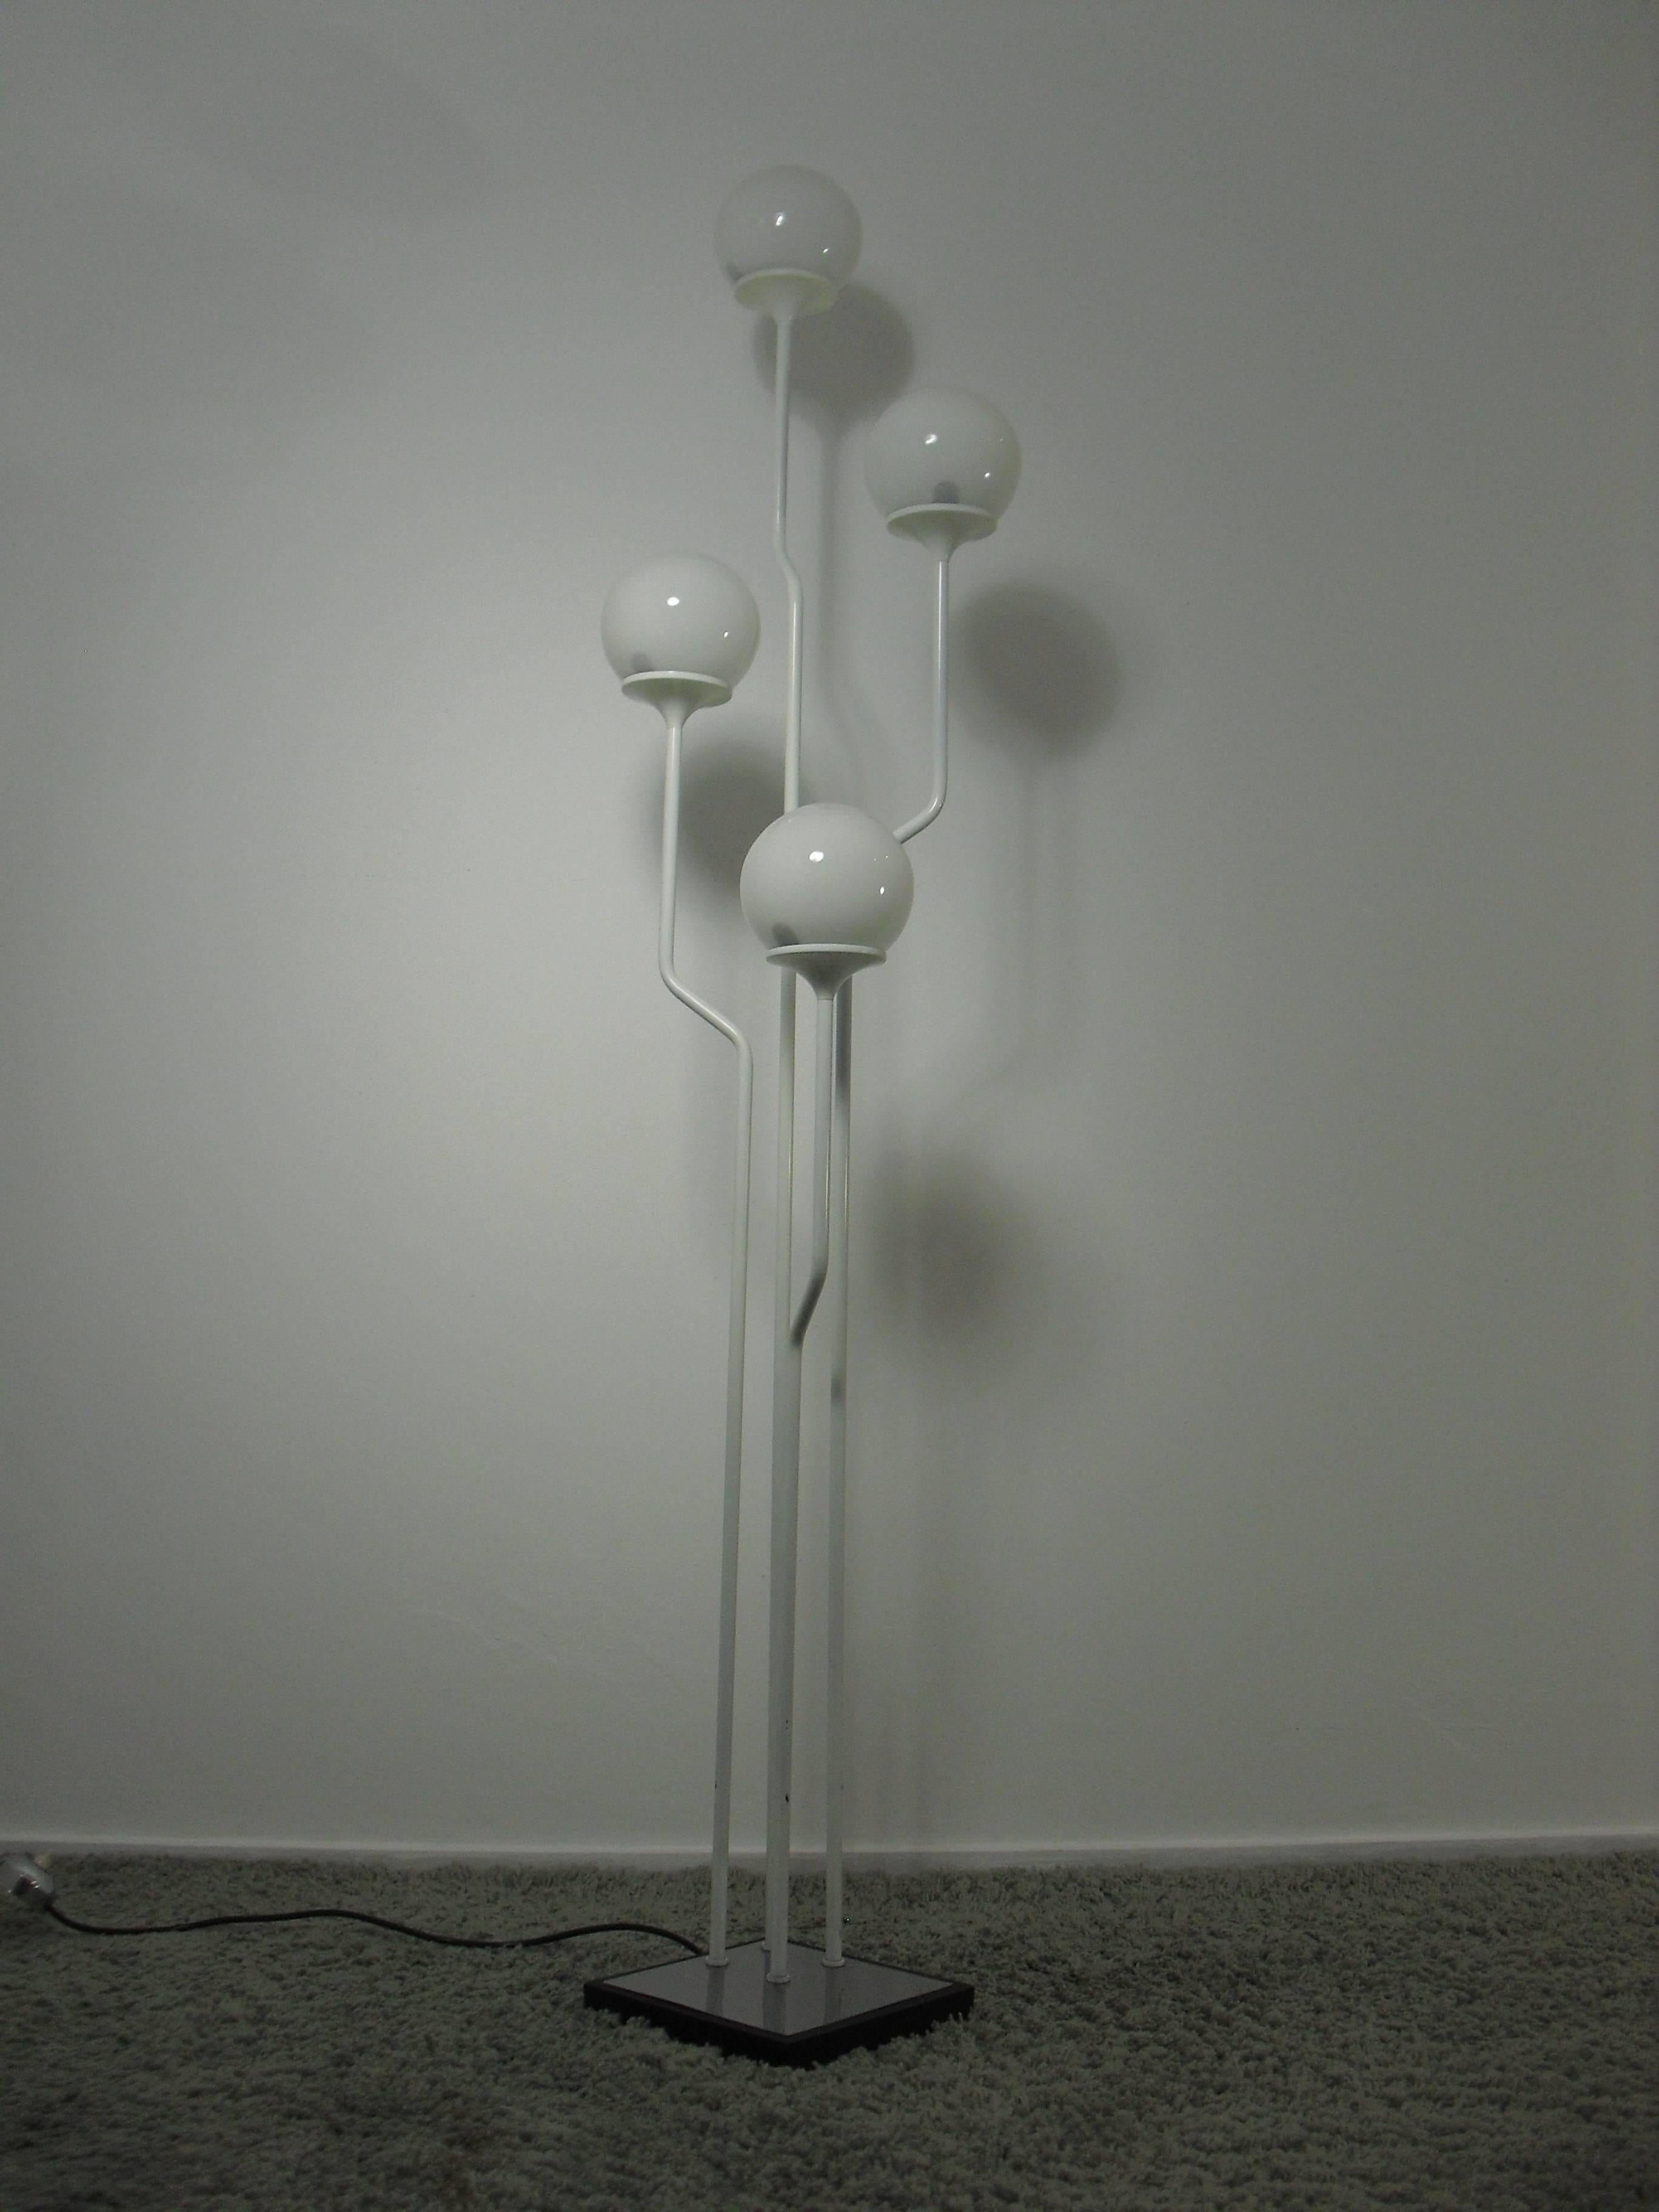 Architectural metal floor lamp by Goffredo Reggiani for Reggiani, Italy, 1960s.

Four white lacquered metal arms on a stone base, with four opaline glass globes in different heights.

Timeless Italian modern item.

Dimensions: H 163 x W 30 x D